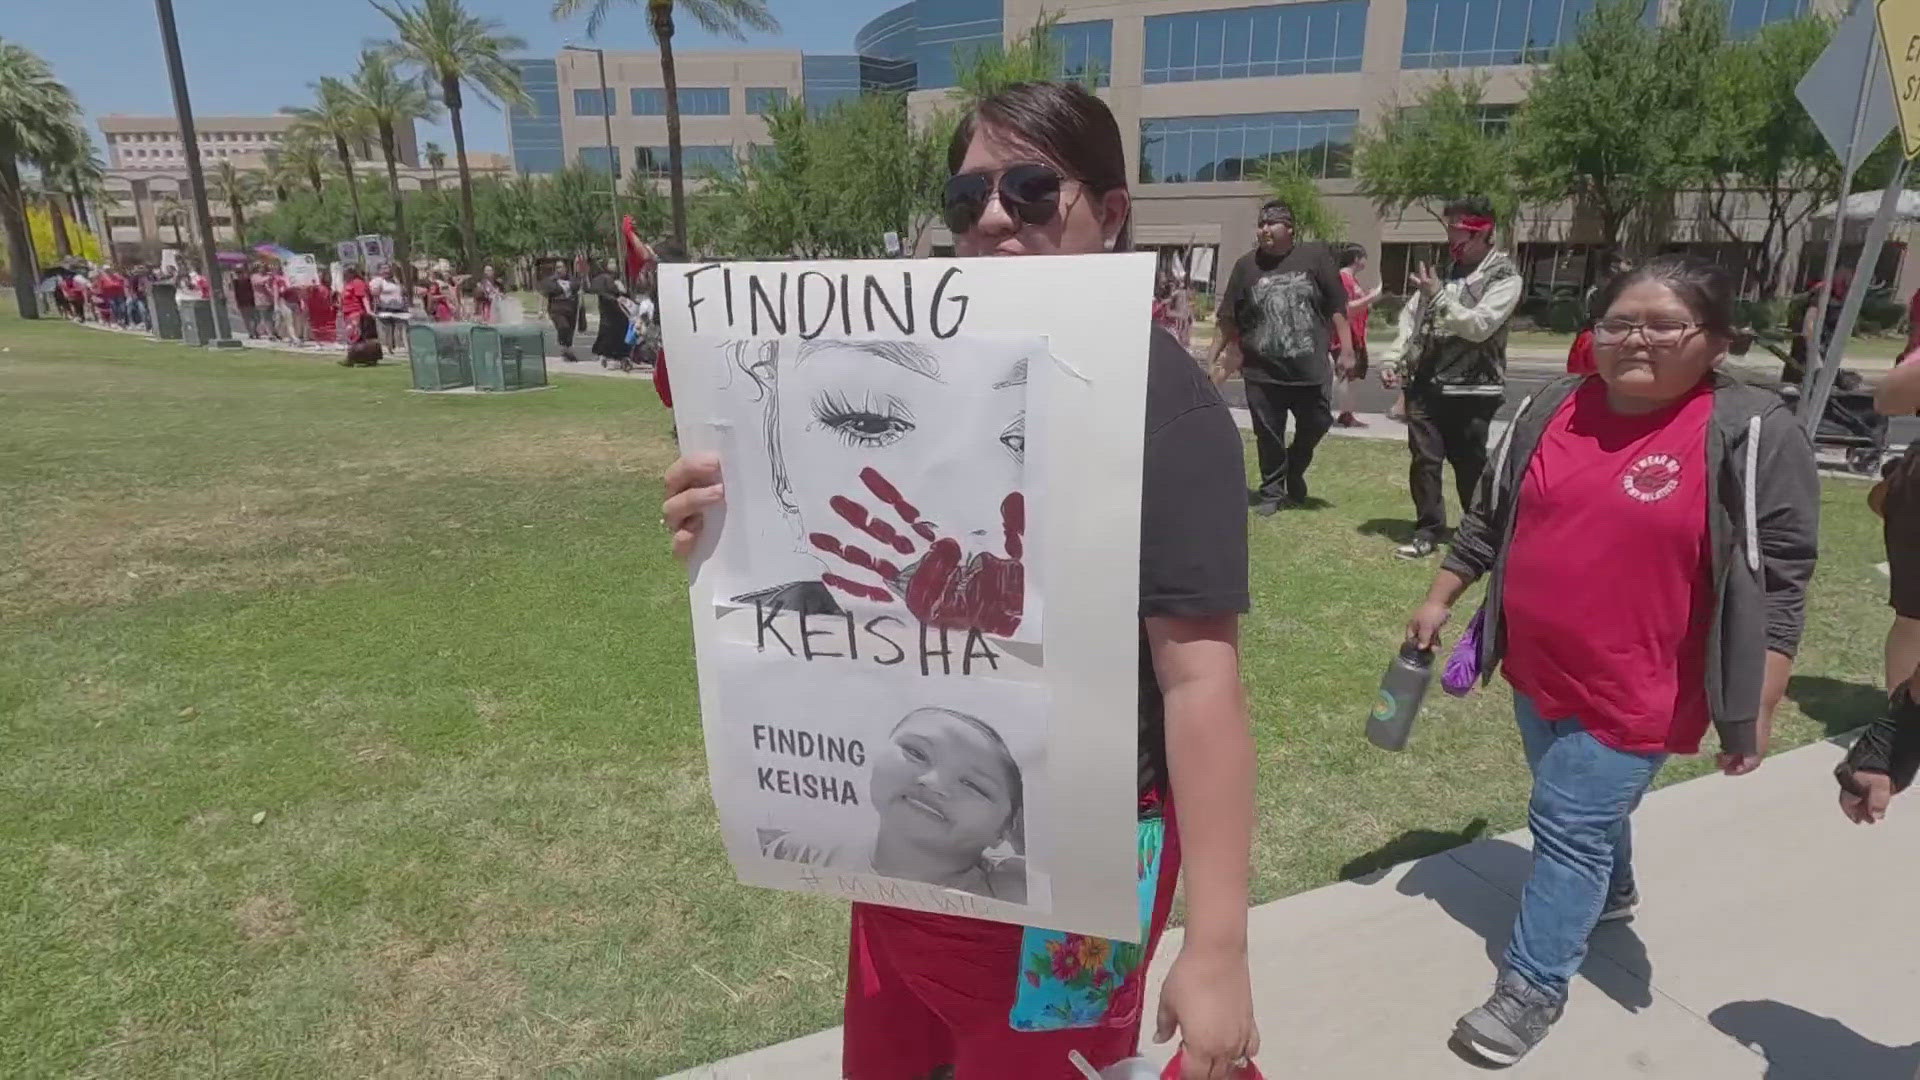 Members from 22 Native American tribes in Arizona gathered for a walk to call for justice for missing and murdered Indigenous people. Watch the video for more.